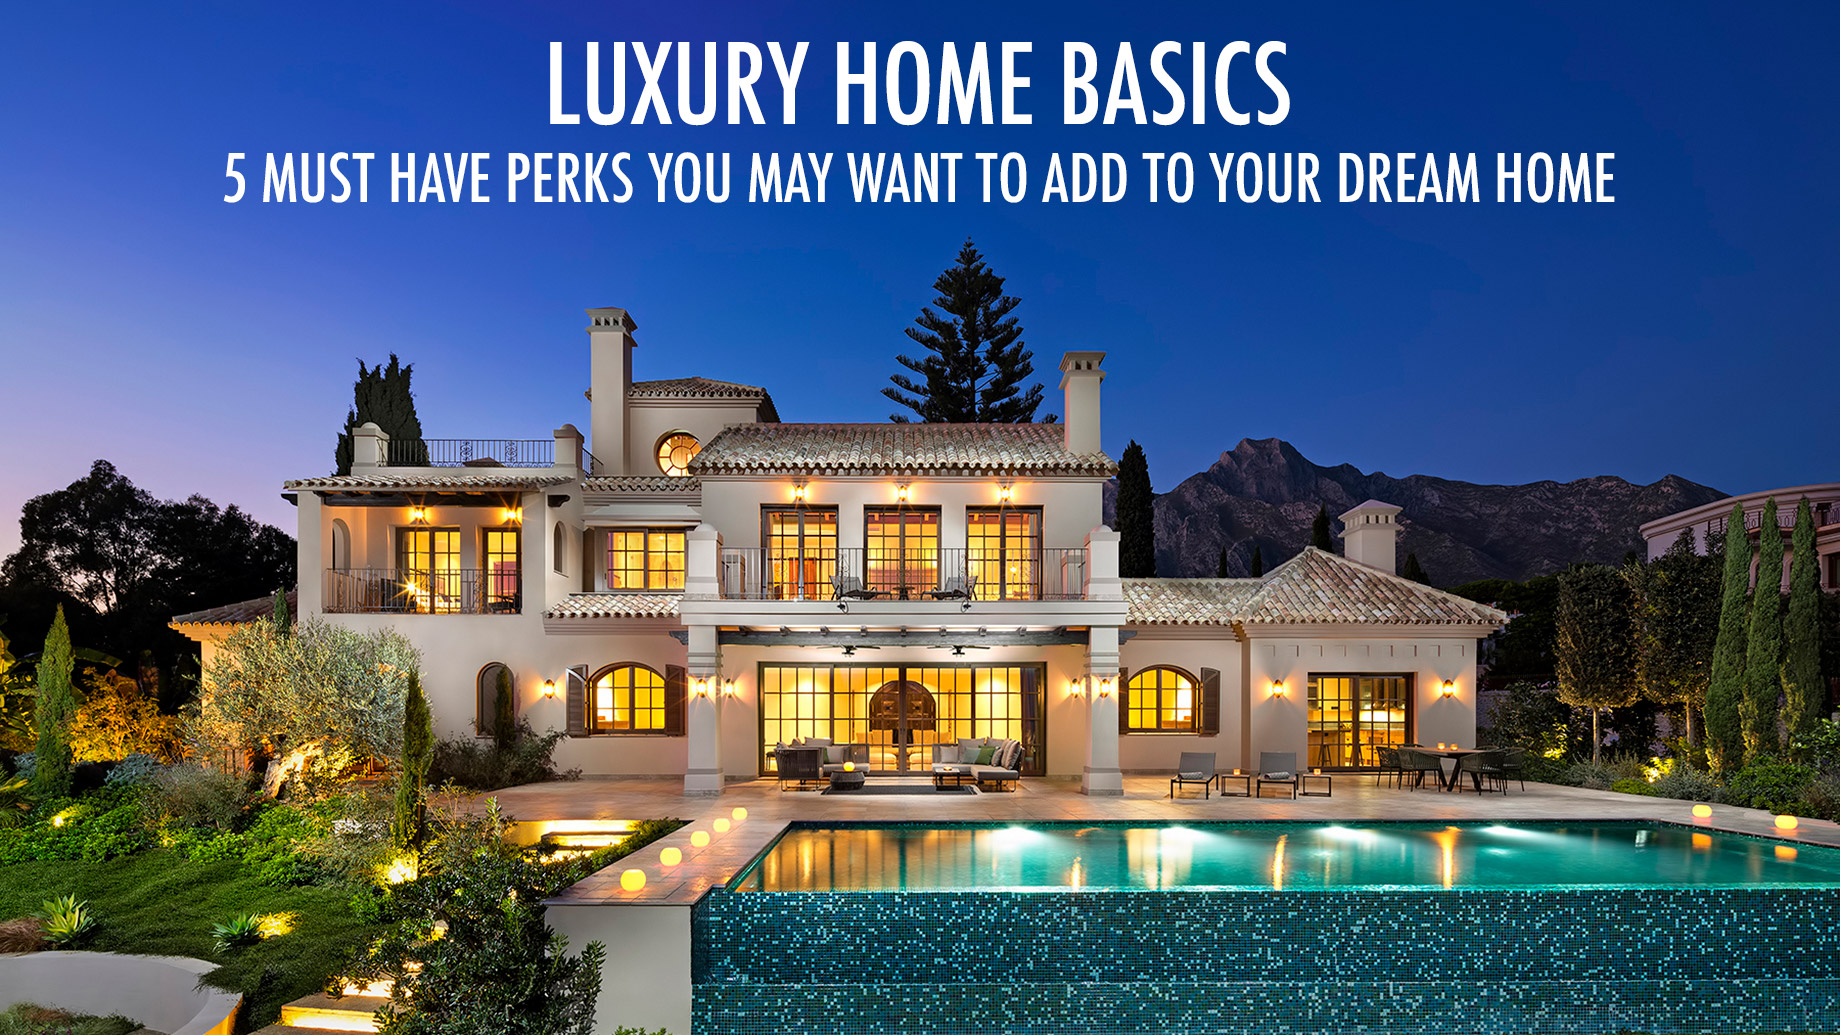 Luxury Home Basics - 5 Must Have Perks You May Want To Add to Your Dream Home